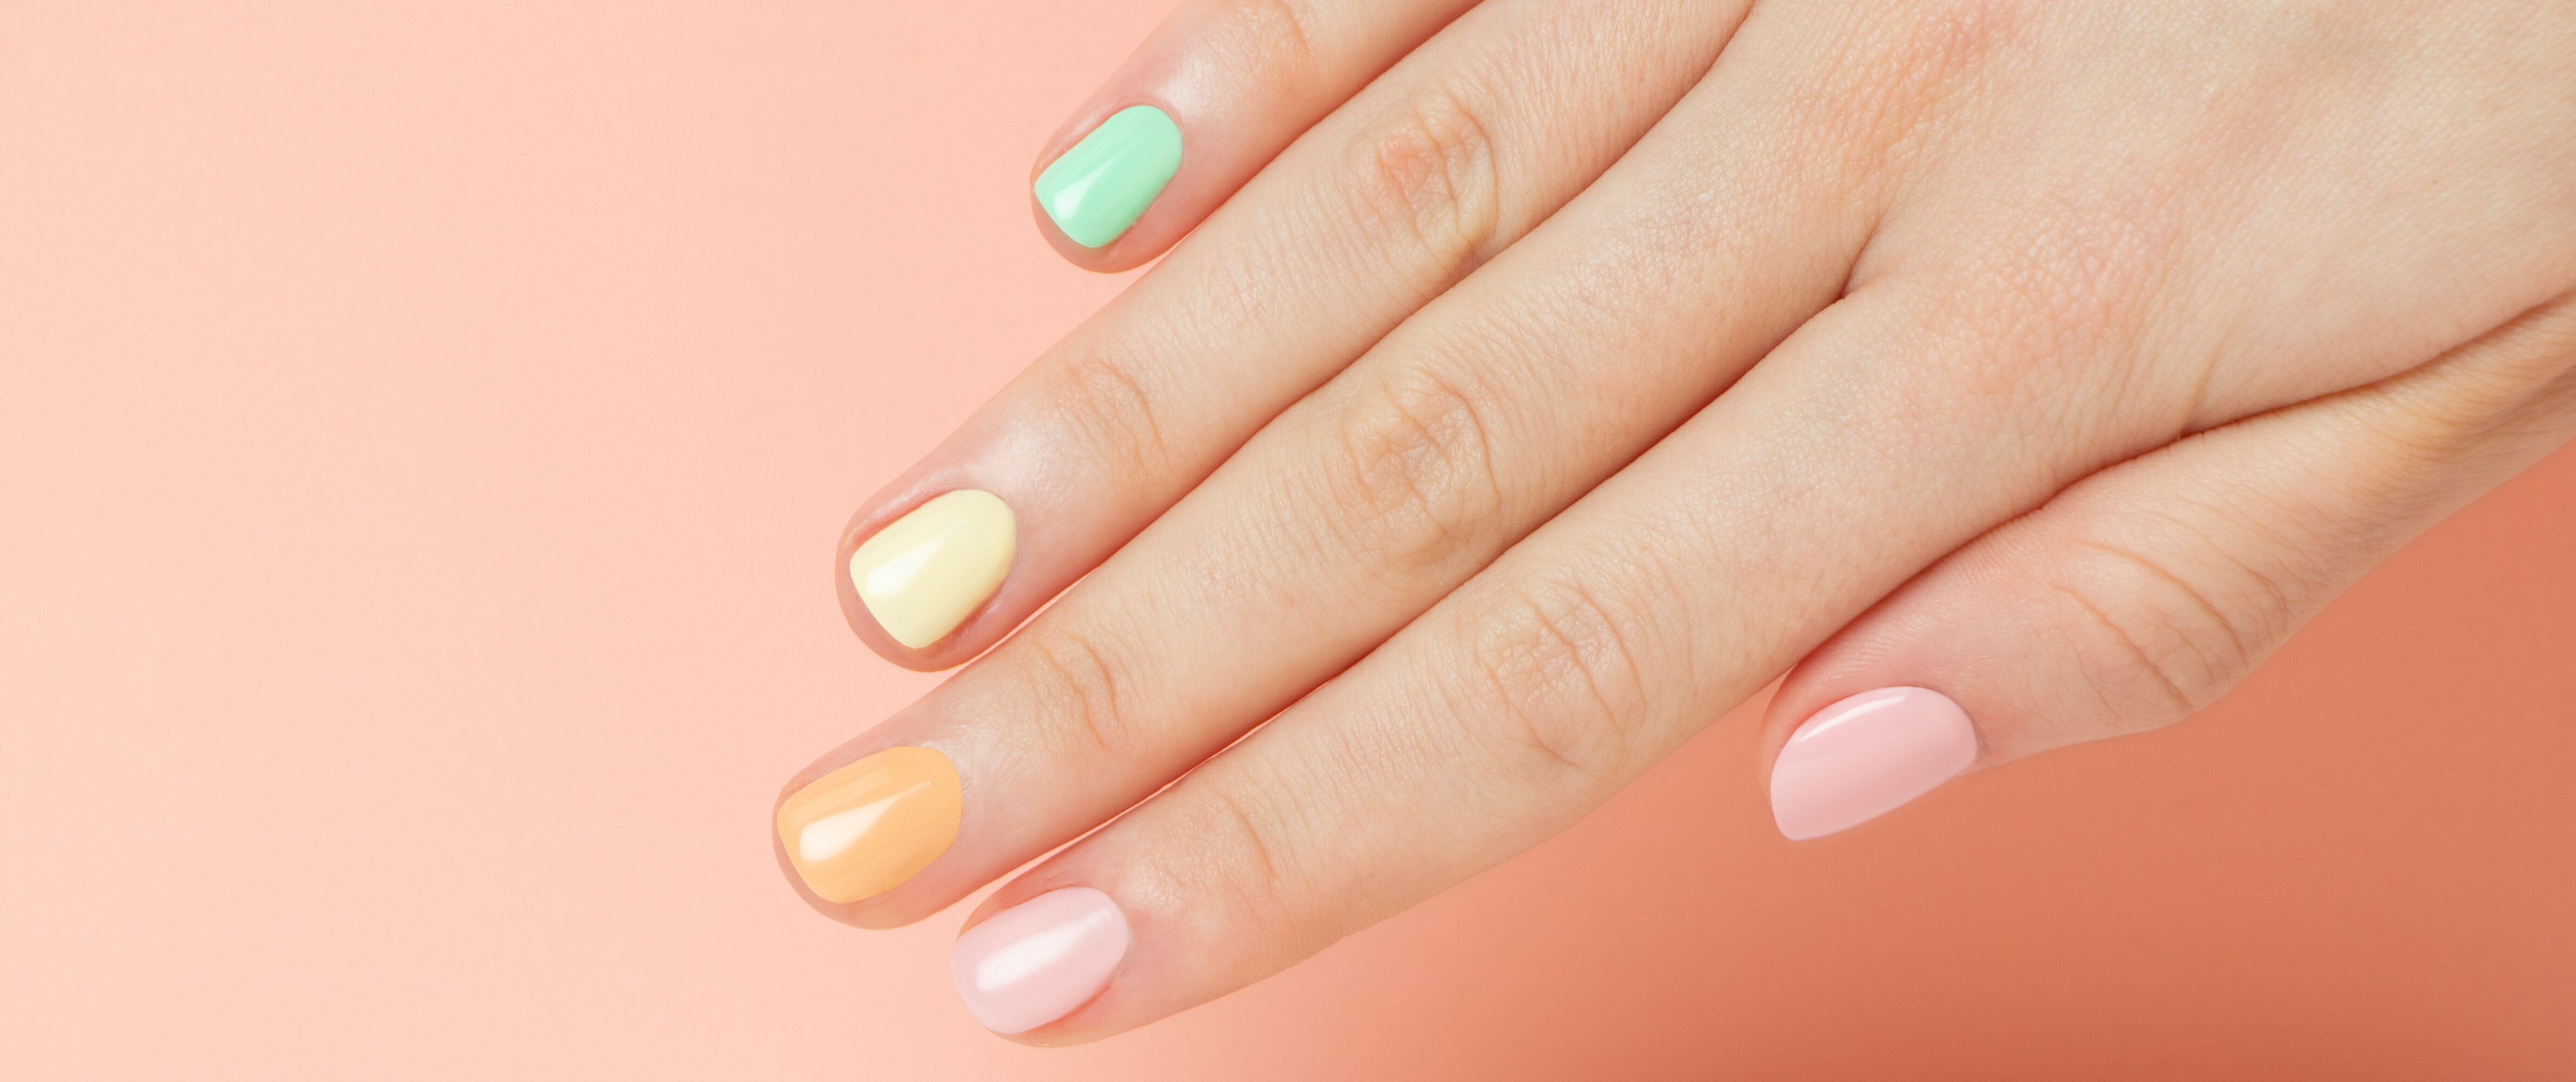 Nail Art Alert! How To Get Ombre Nails At Home | Glamour